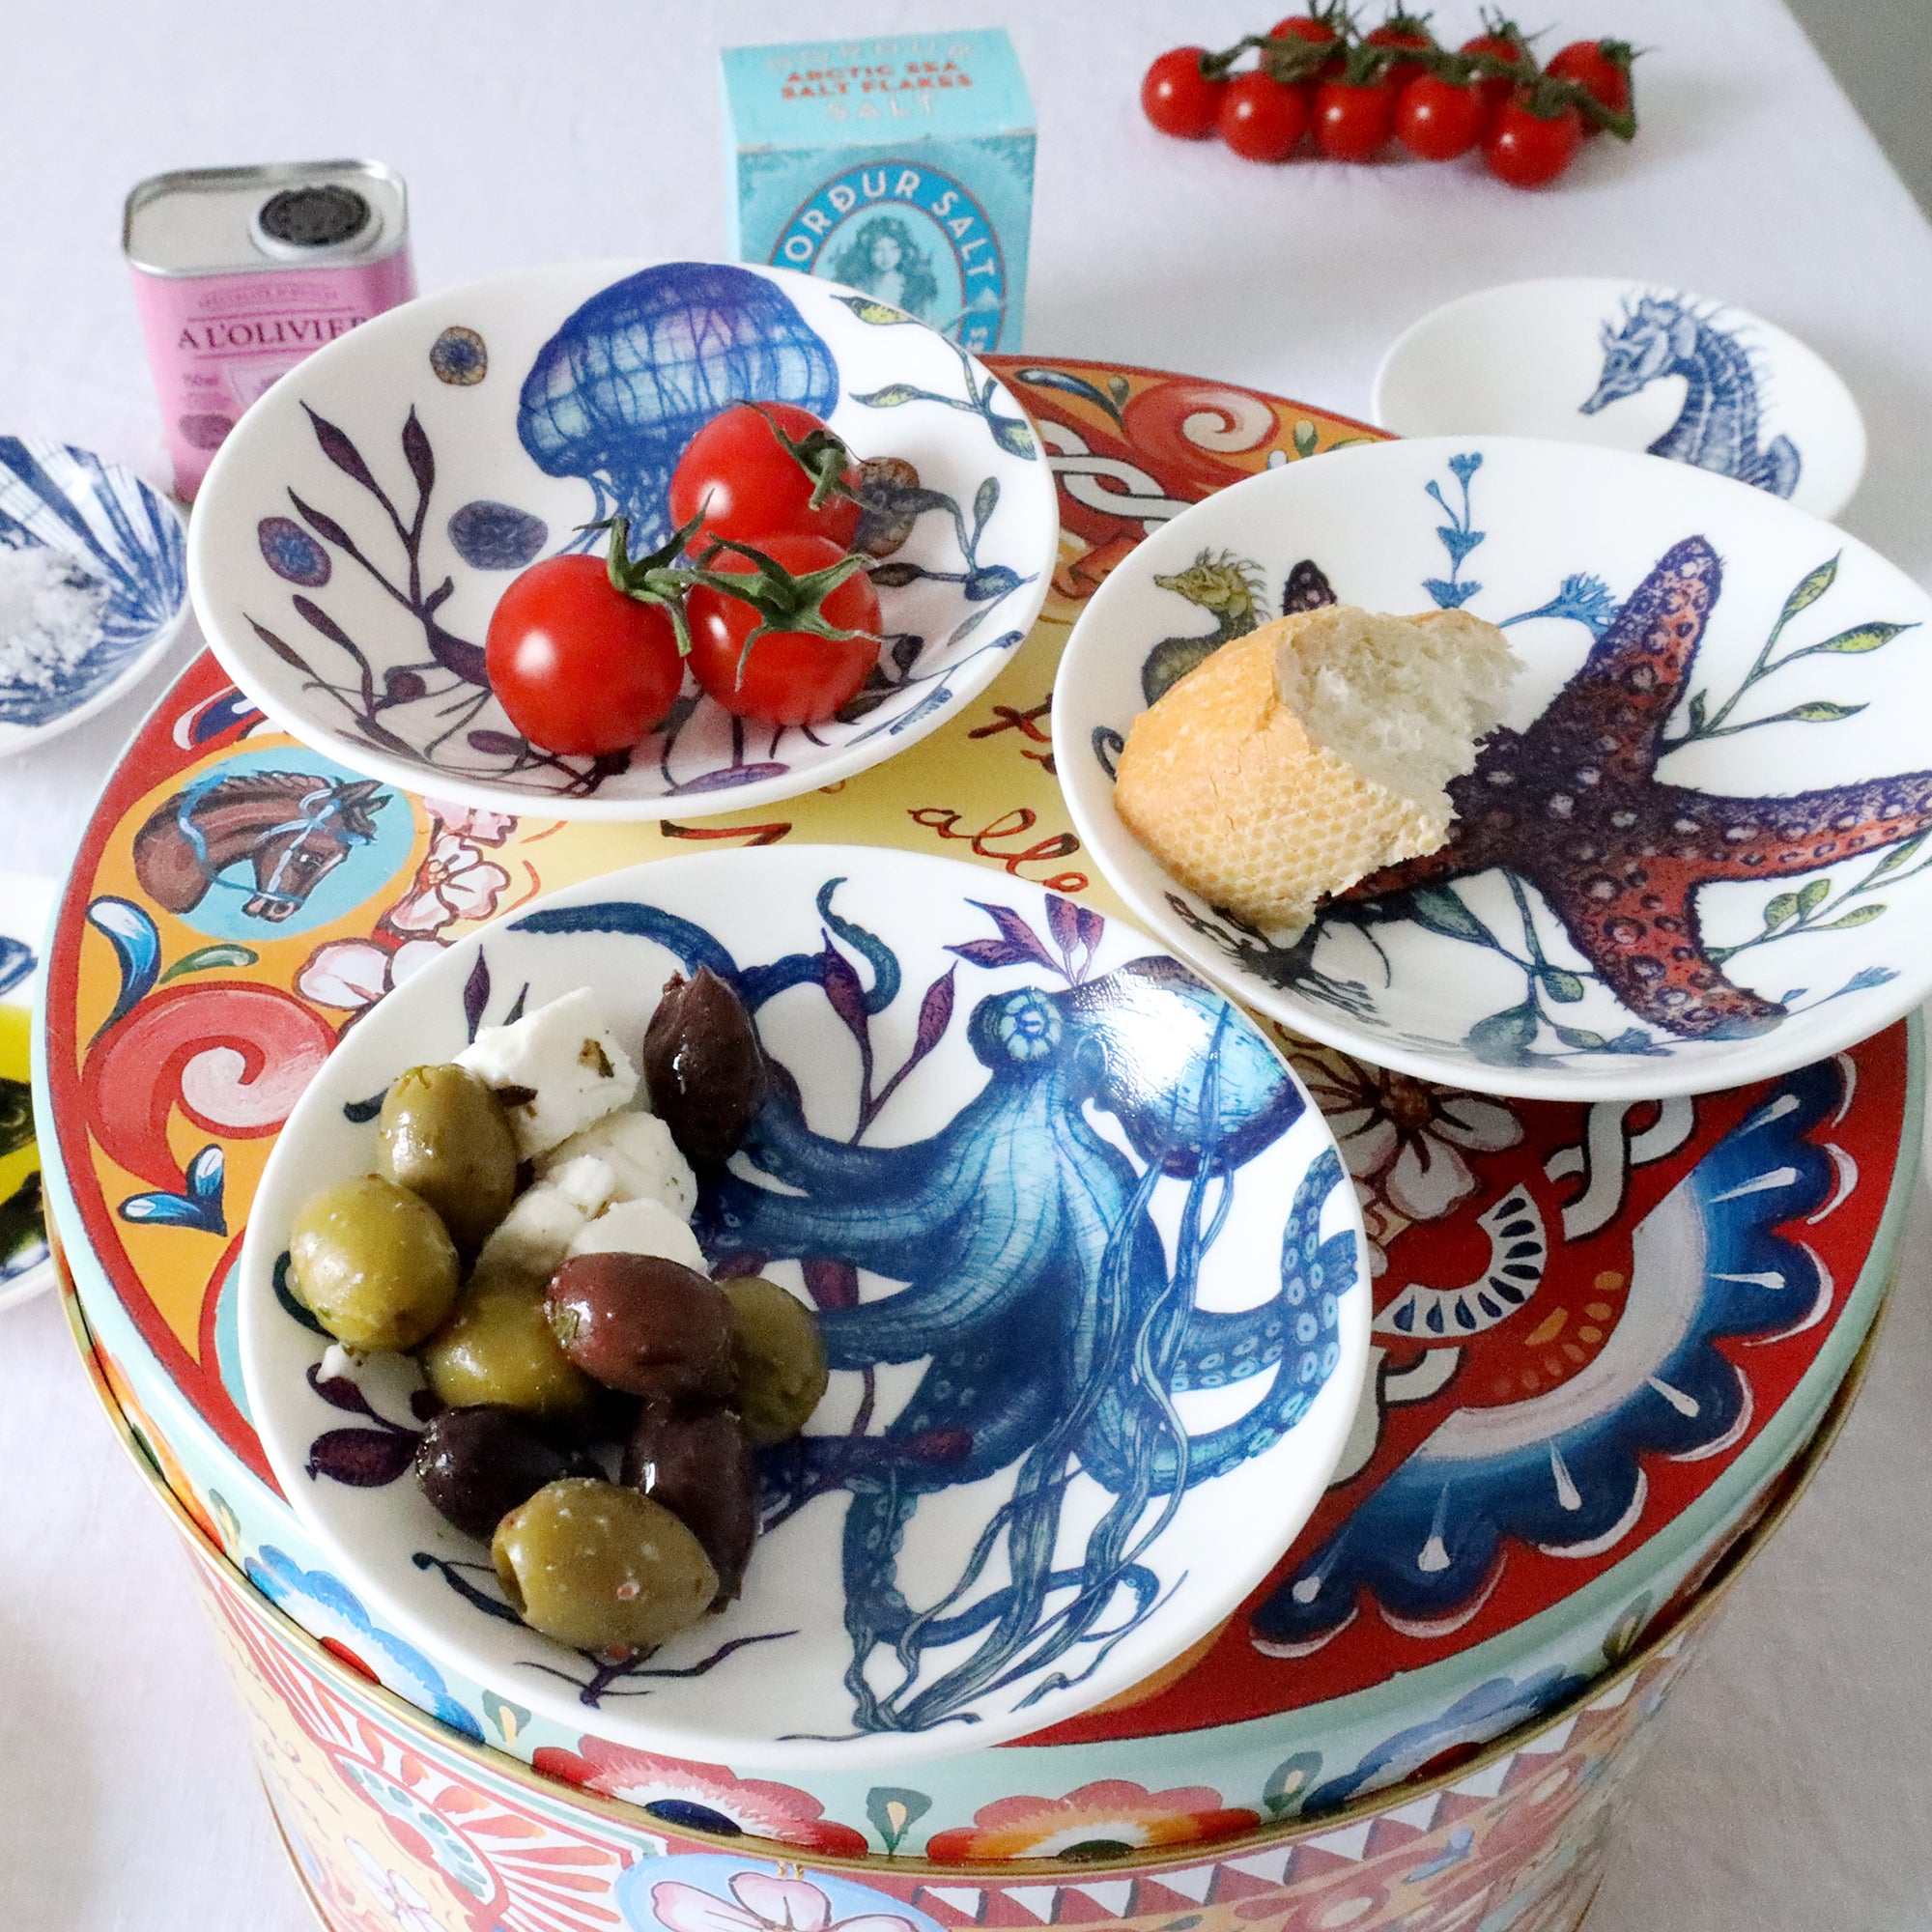 Nibbles bowl in Bone China in our colourful Reef range in the Octopus design placed on a brightly coloured tin with other nibbles bowls from our Reef range.All bowls have olives,bread ,tomatoes in.In the background you can see other items on the ta